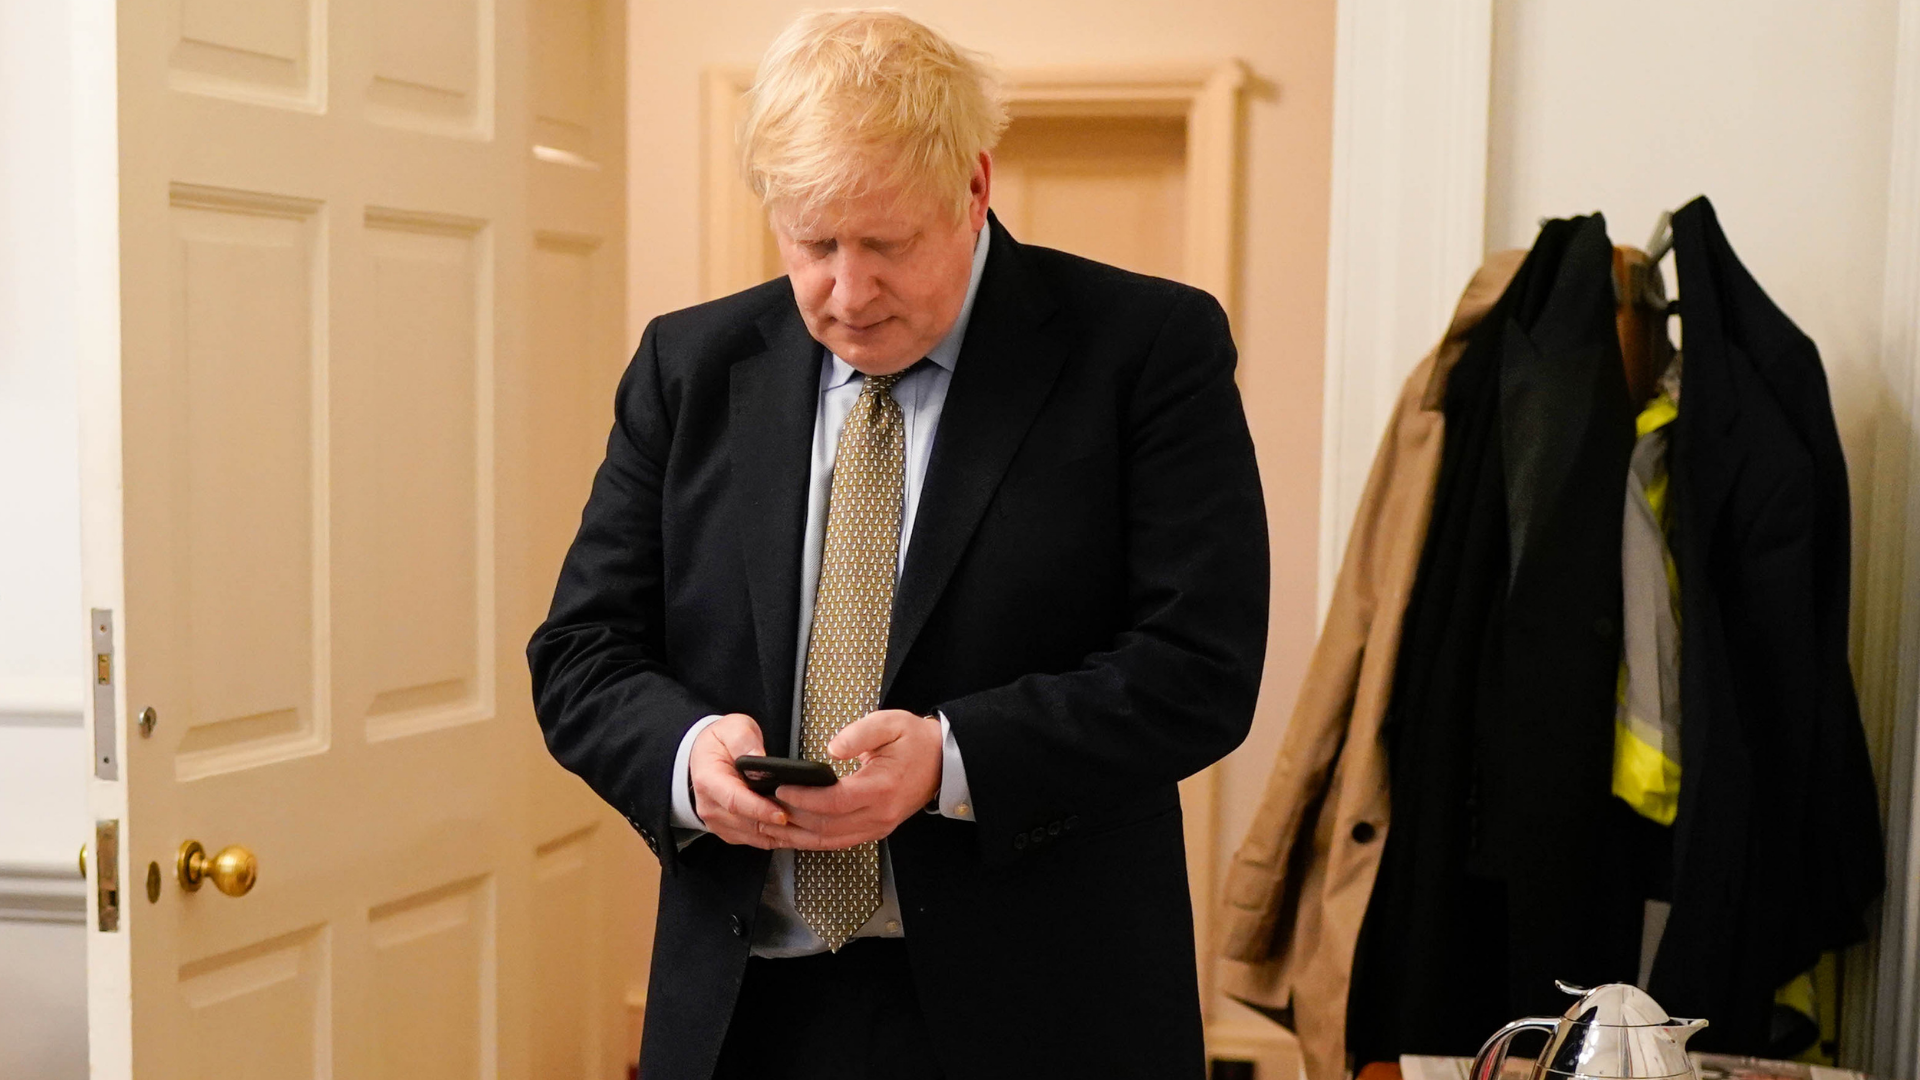 Boris Johnson has come under fire from opposition leaders after promising to ‘fix’ tax rules for James Dyson in a series of texts. Image credit: No 10 / Flickr